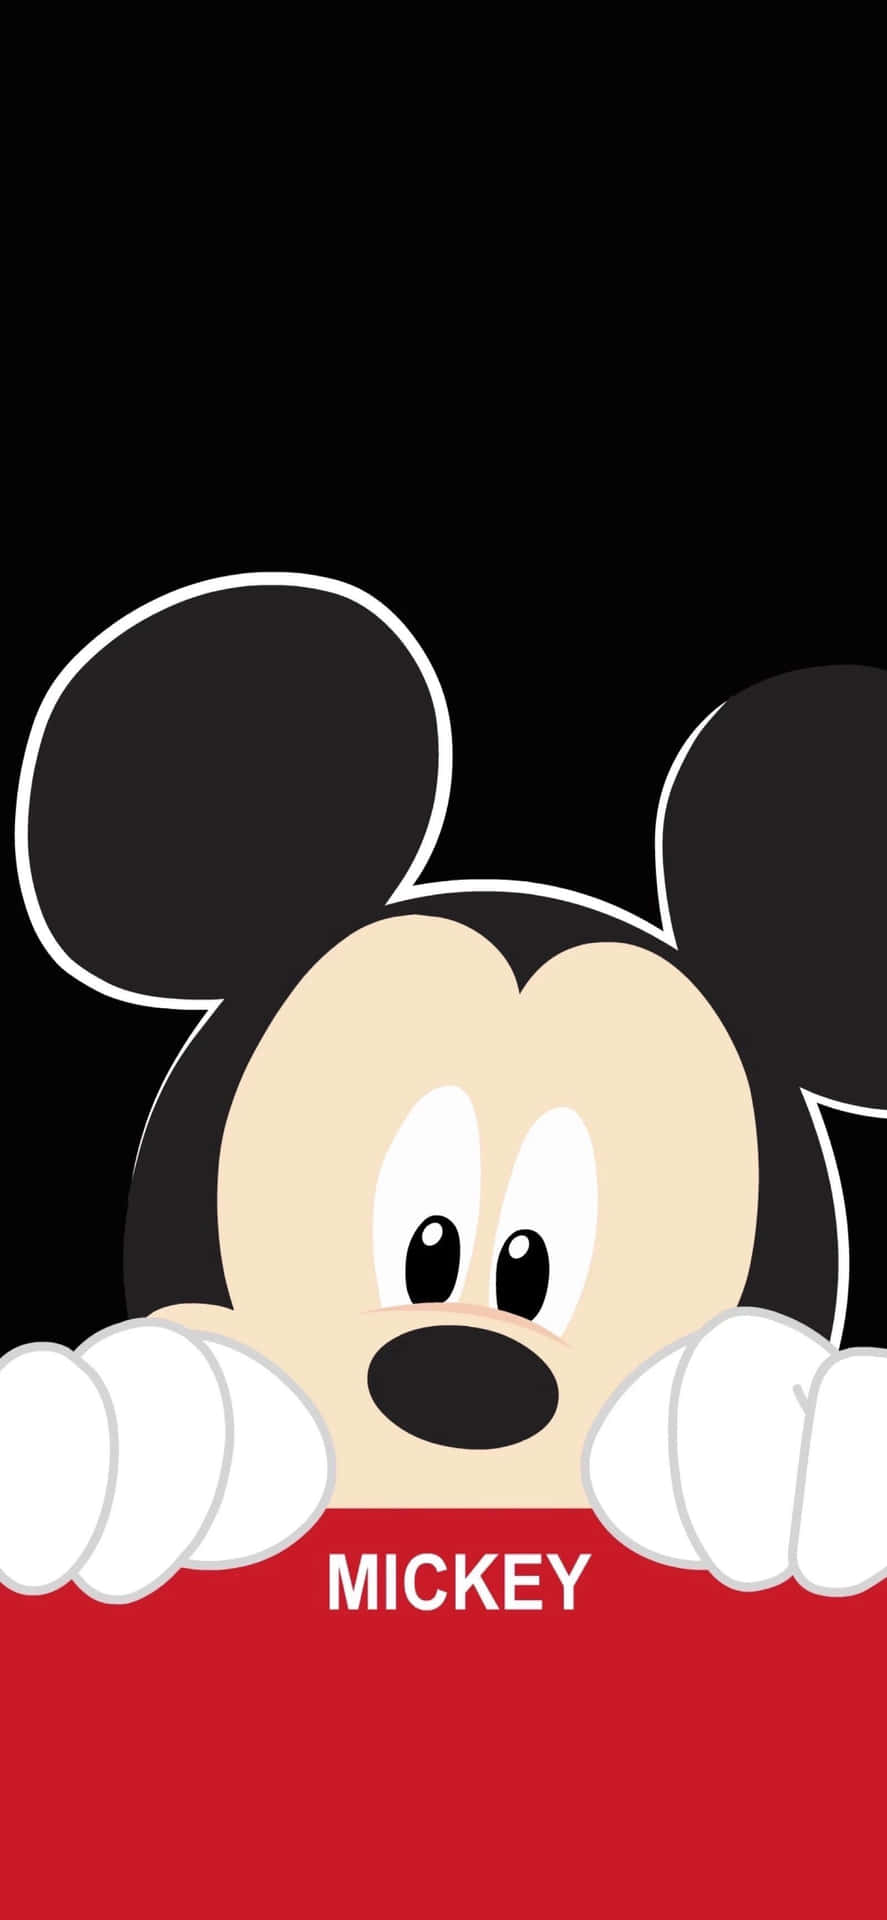 Show your Disney spirit with these iconic Mickey Mouse ears! Wallpaper